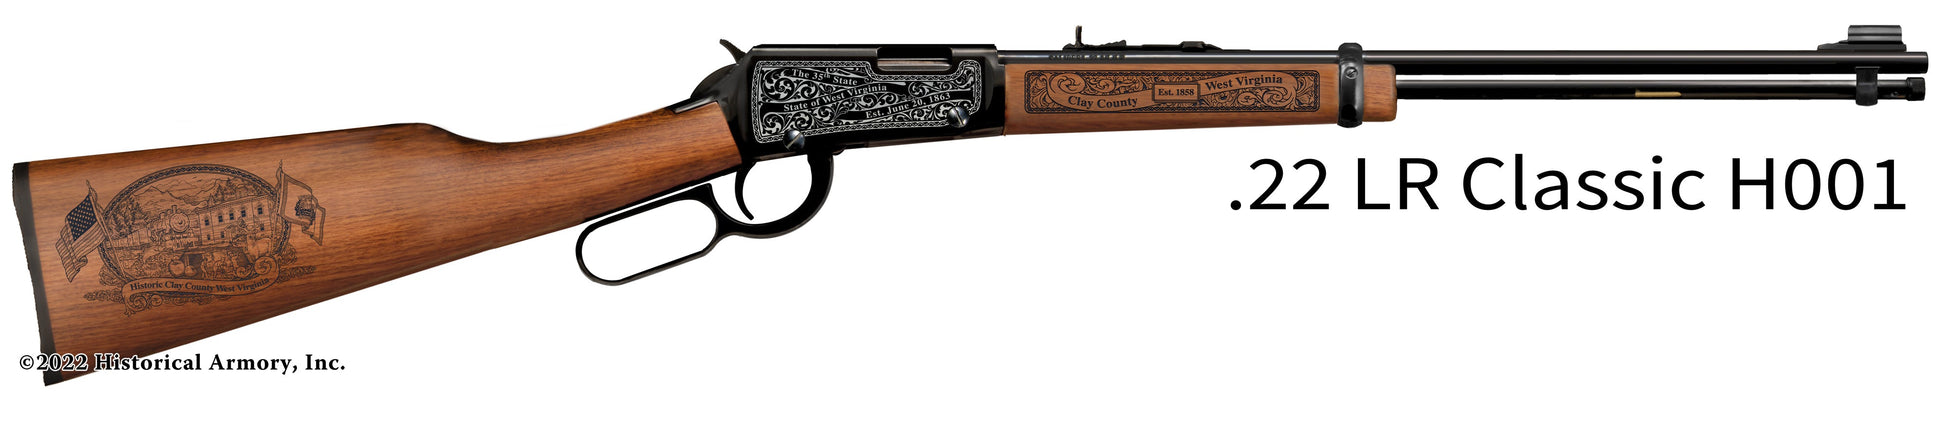 Clay County West Virginia Engraved Henry H001 Rifle